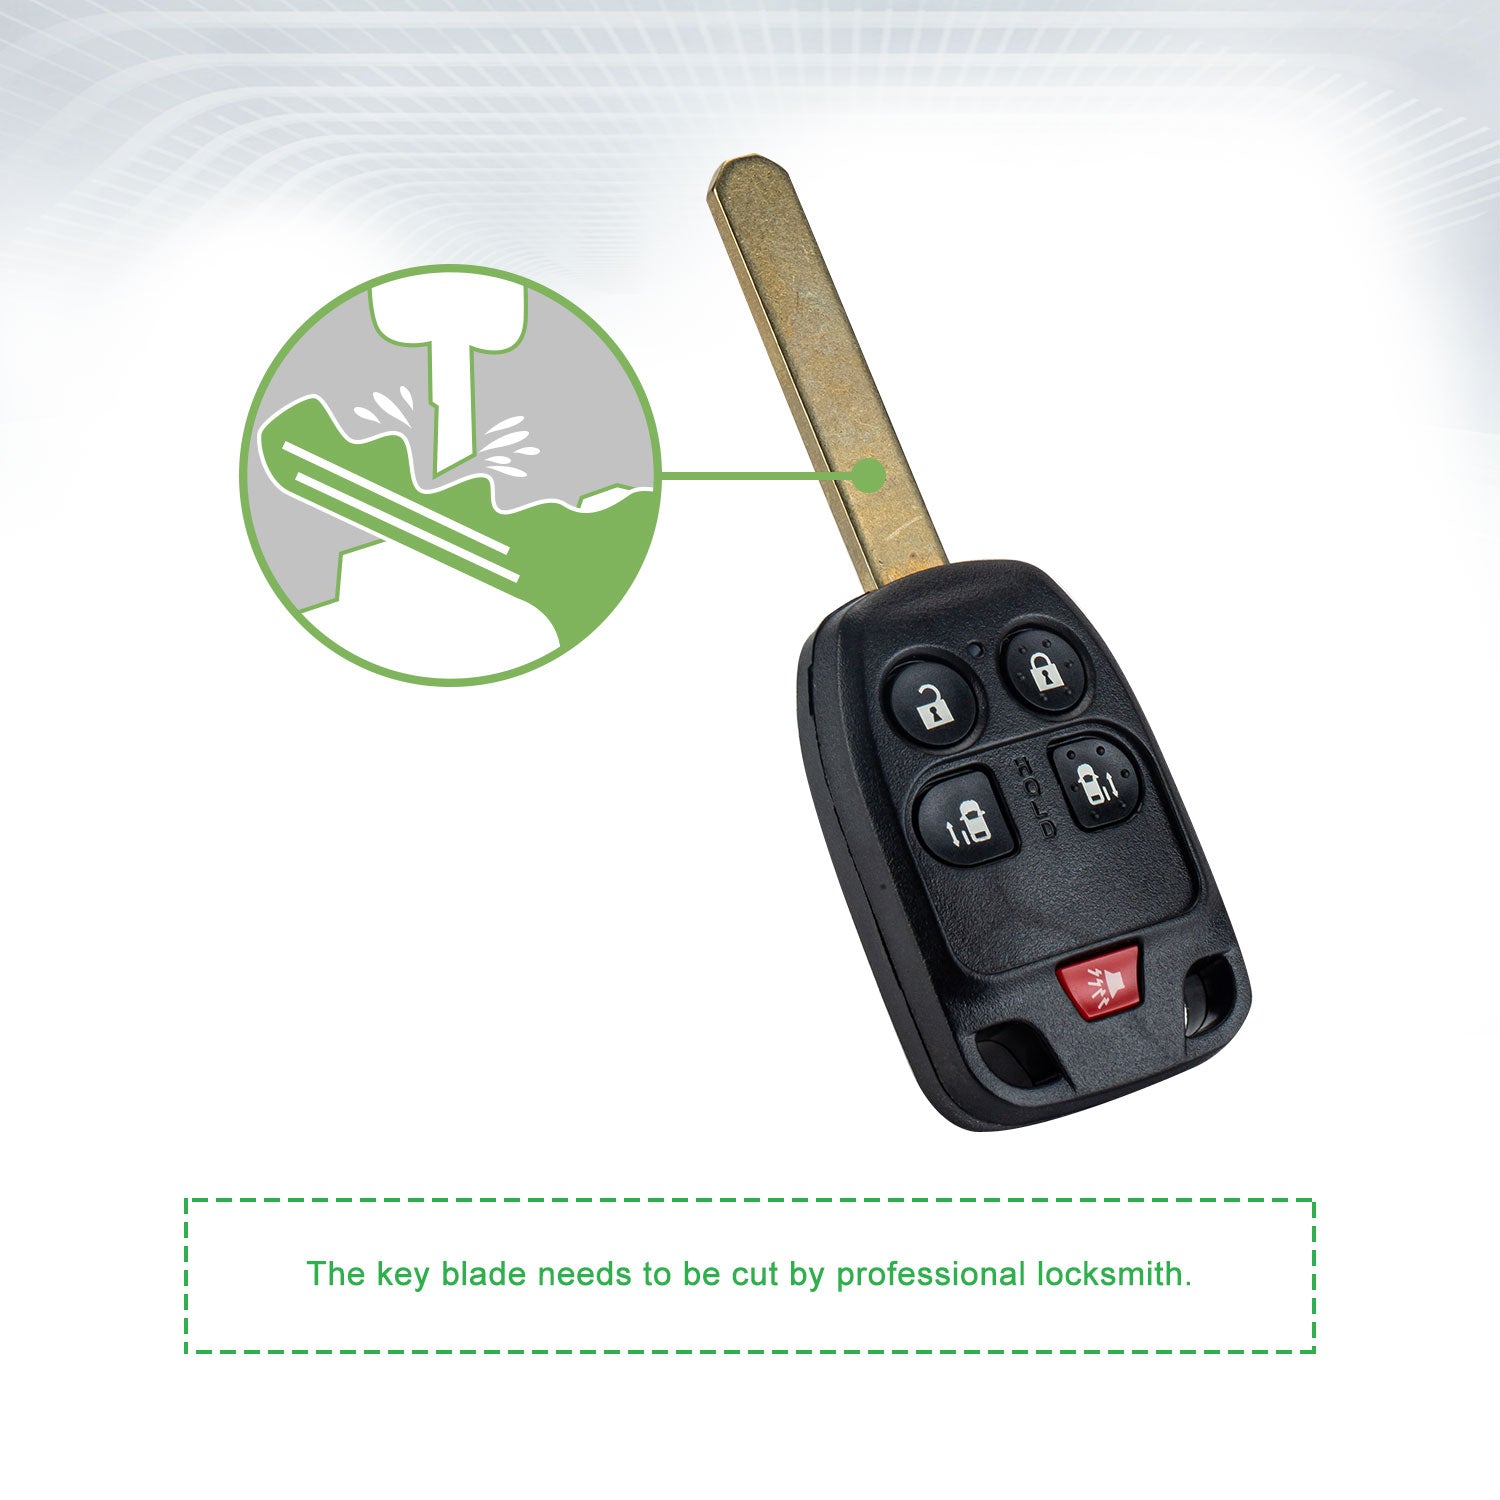 Lots of 5 Remote Car Key Fob Replacement for Honda N5F-A04TAA fits 2011 2012 2013 2014 Odyssey 5 Button